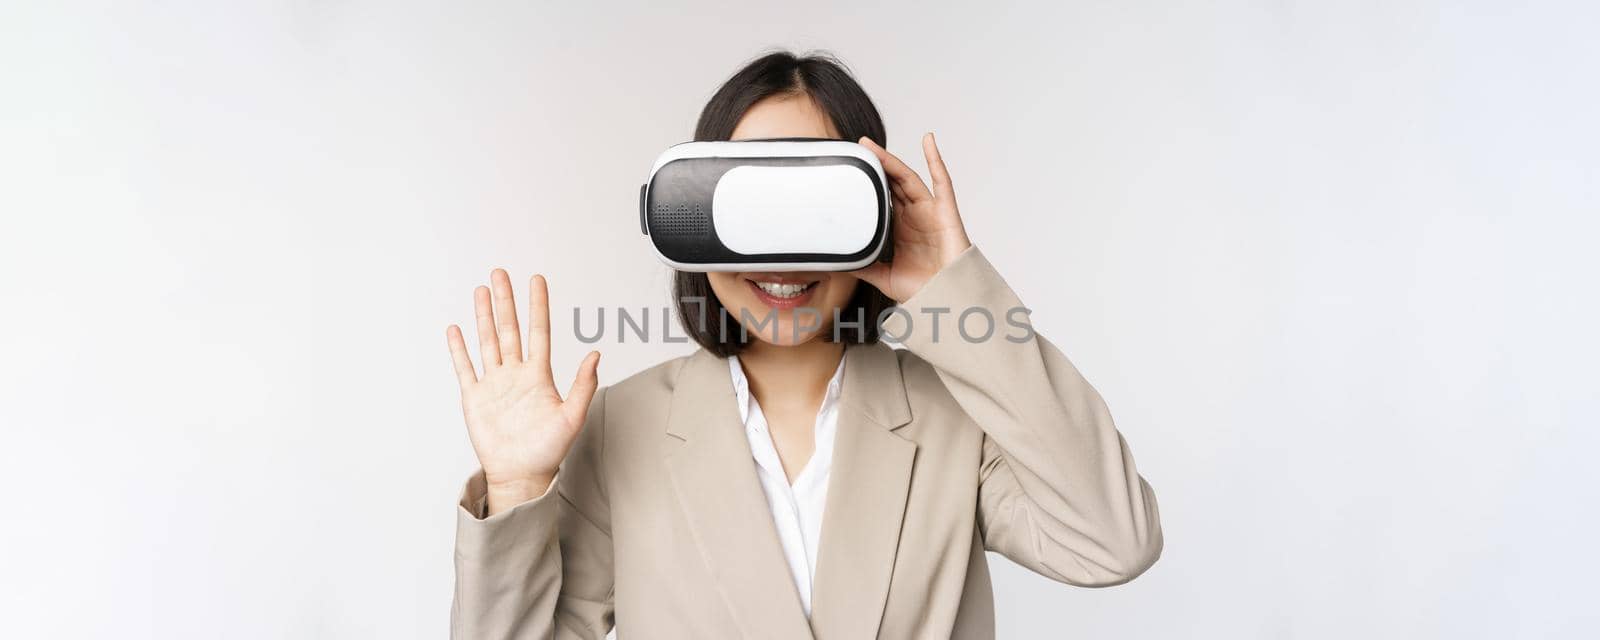 Meeting in vr chat. Asian businesswoman in virtual reality glasses, raising hand and saying hello, greeting someone, standing over white background.